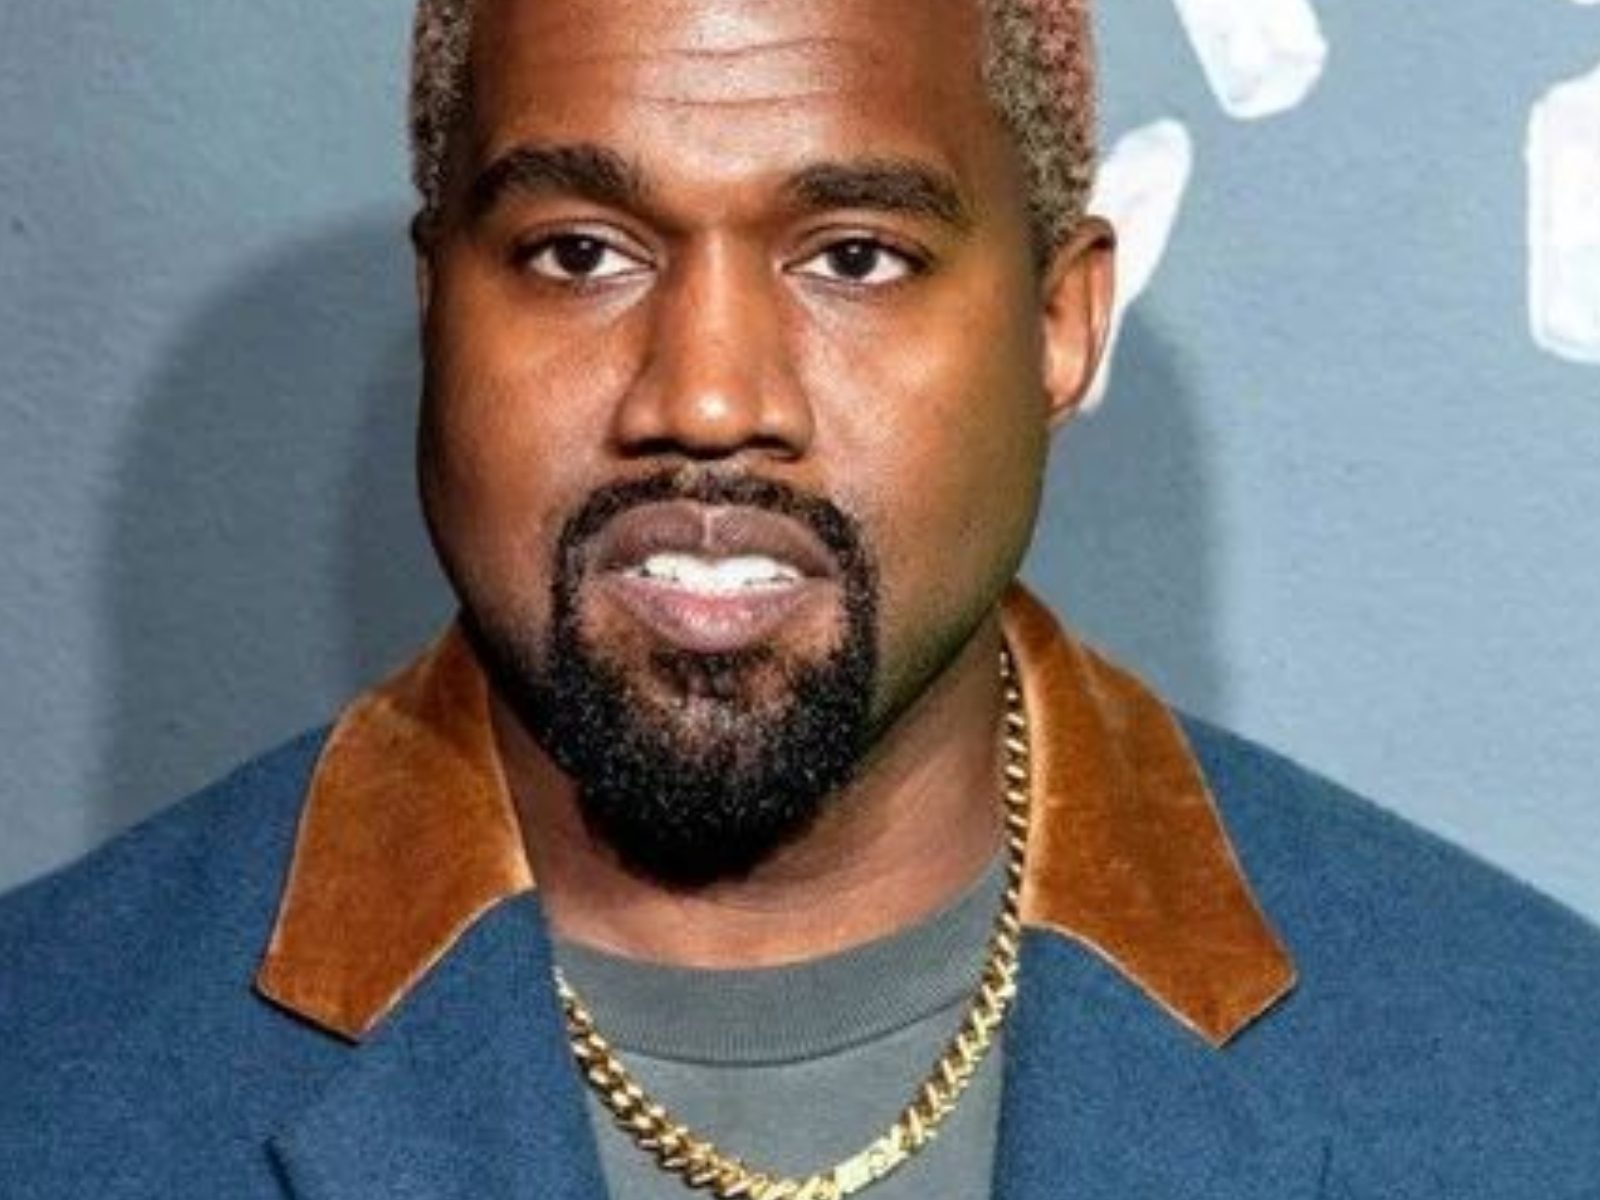 Mom Fucks Son After Divorce Latestincest - Kanye West Opens Up About His 'Addiction To Porn': 'It Destroyed My Family'  - News18